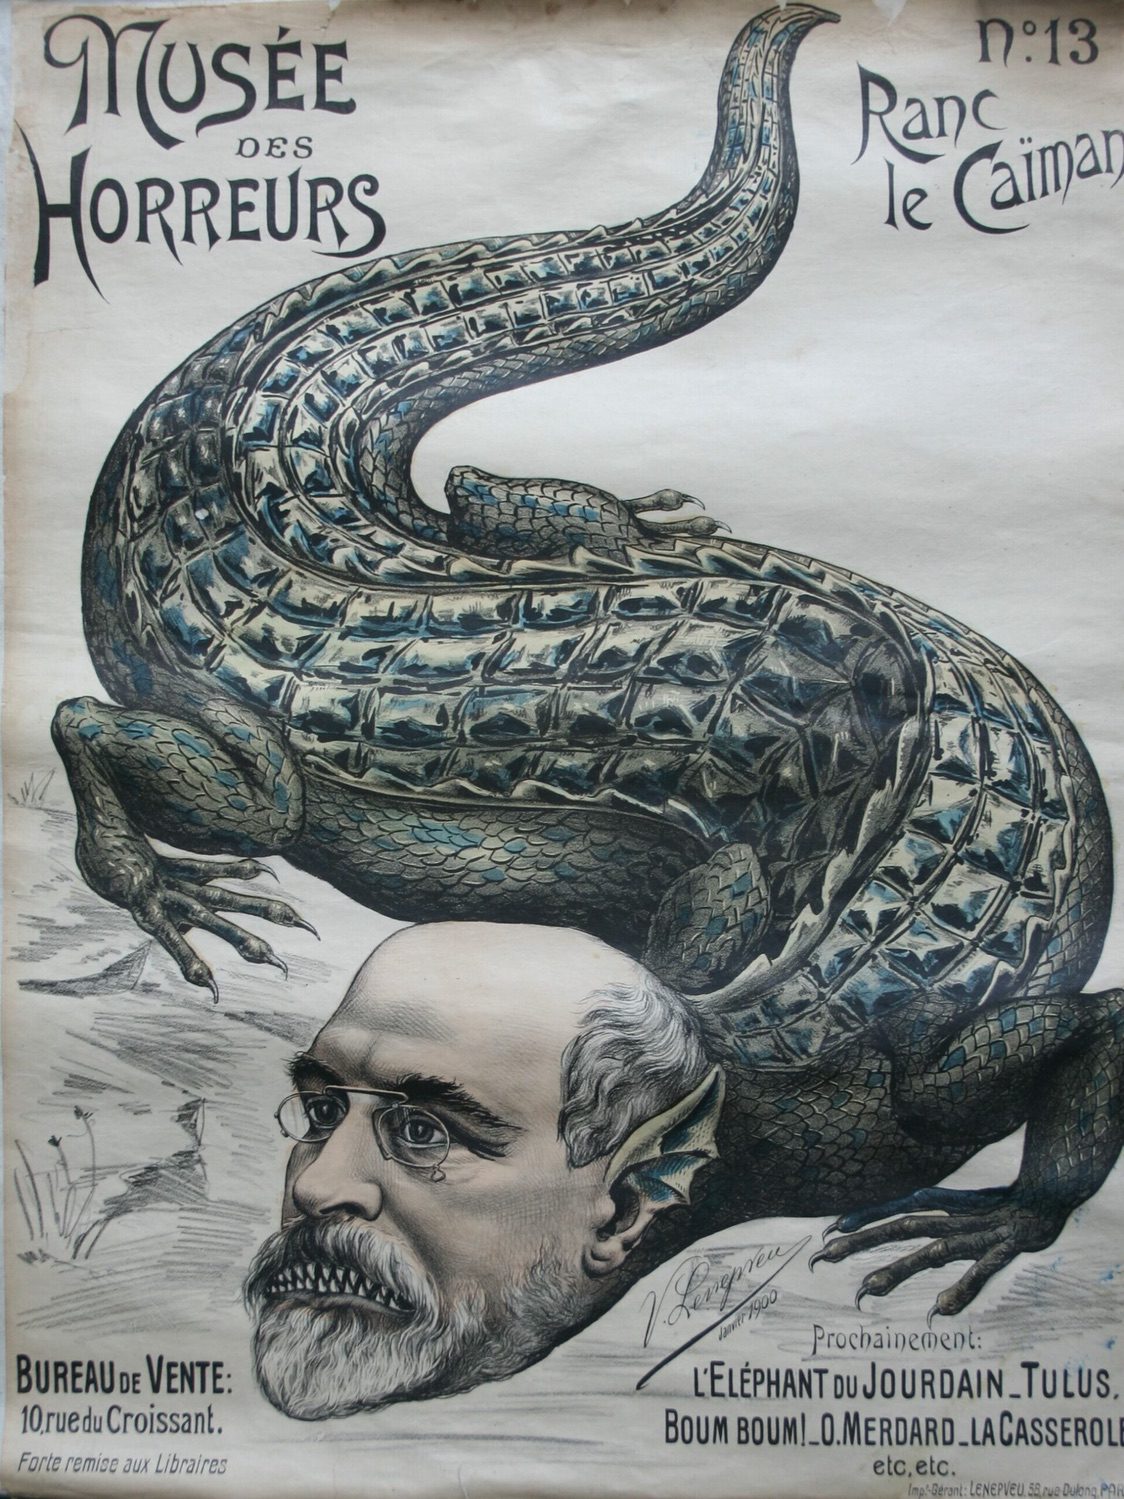 Poster with picture of a man with the body of a reptile.